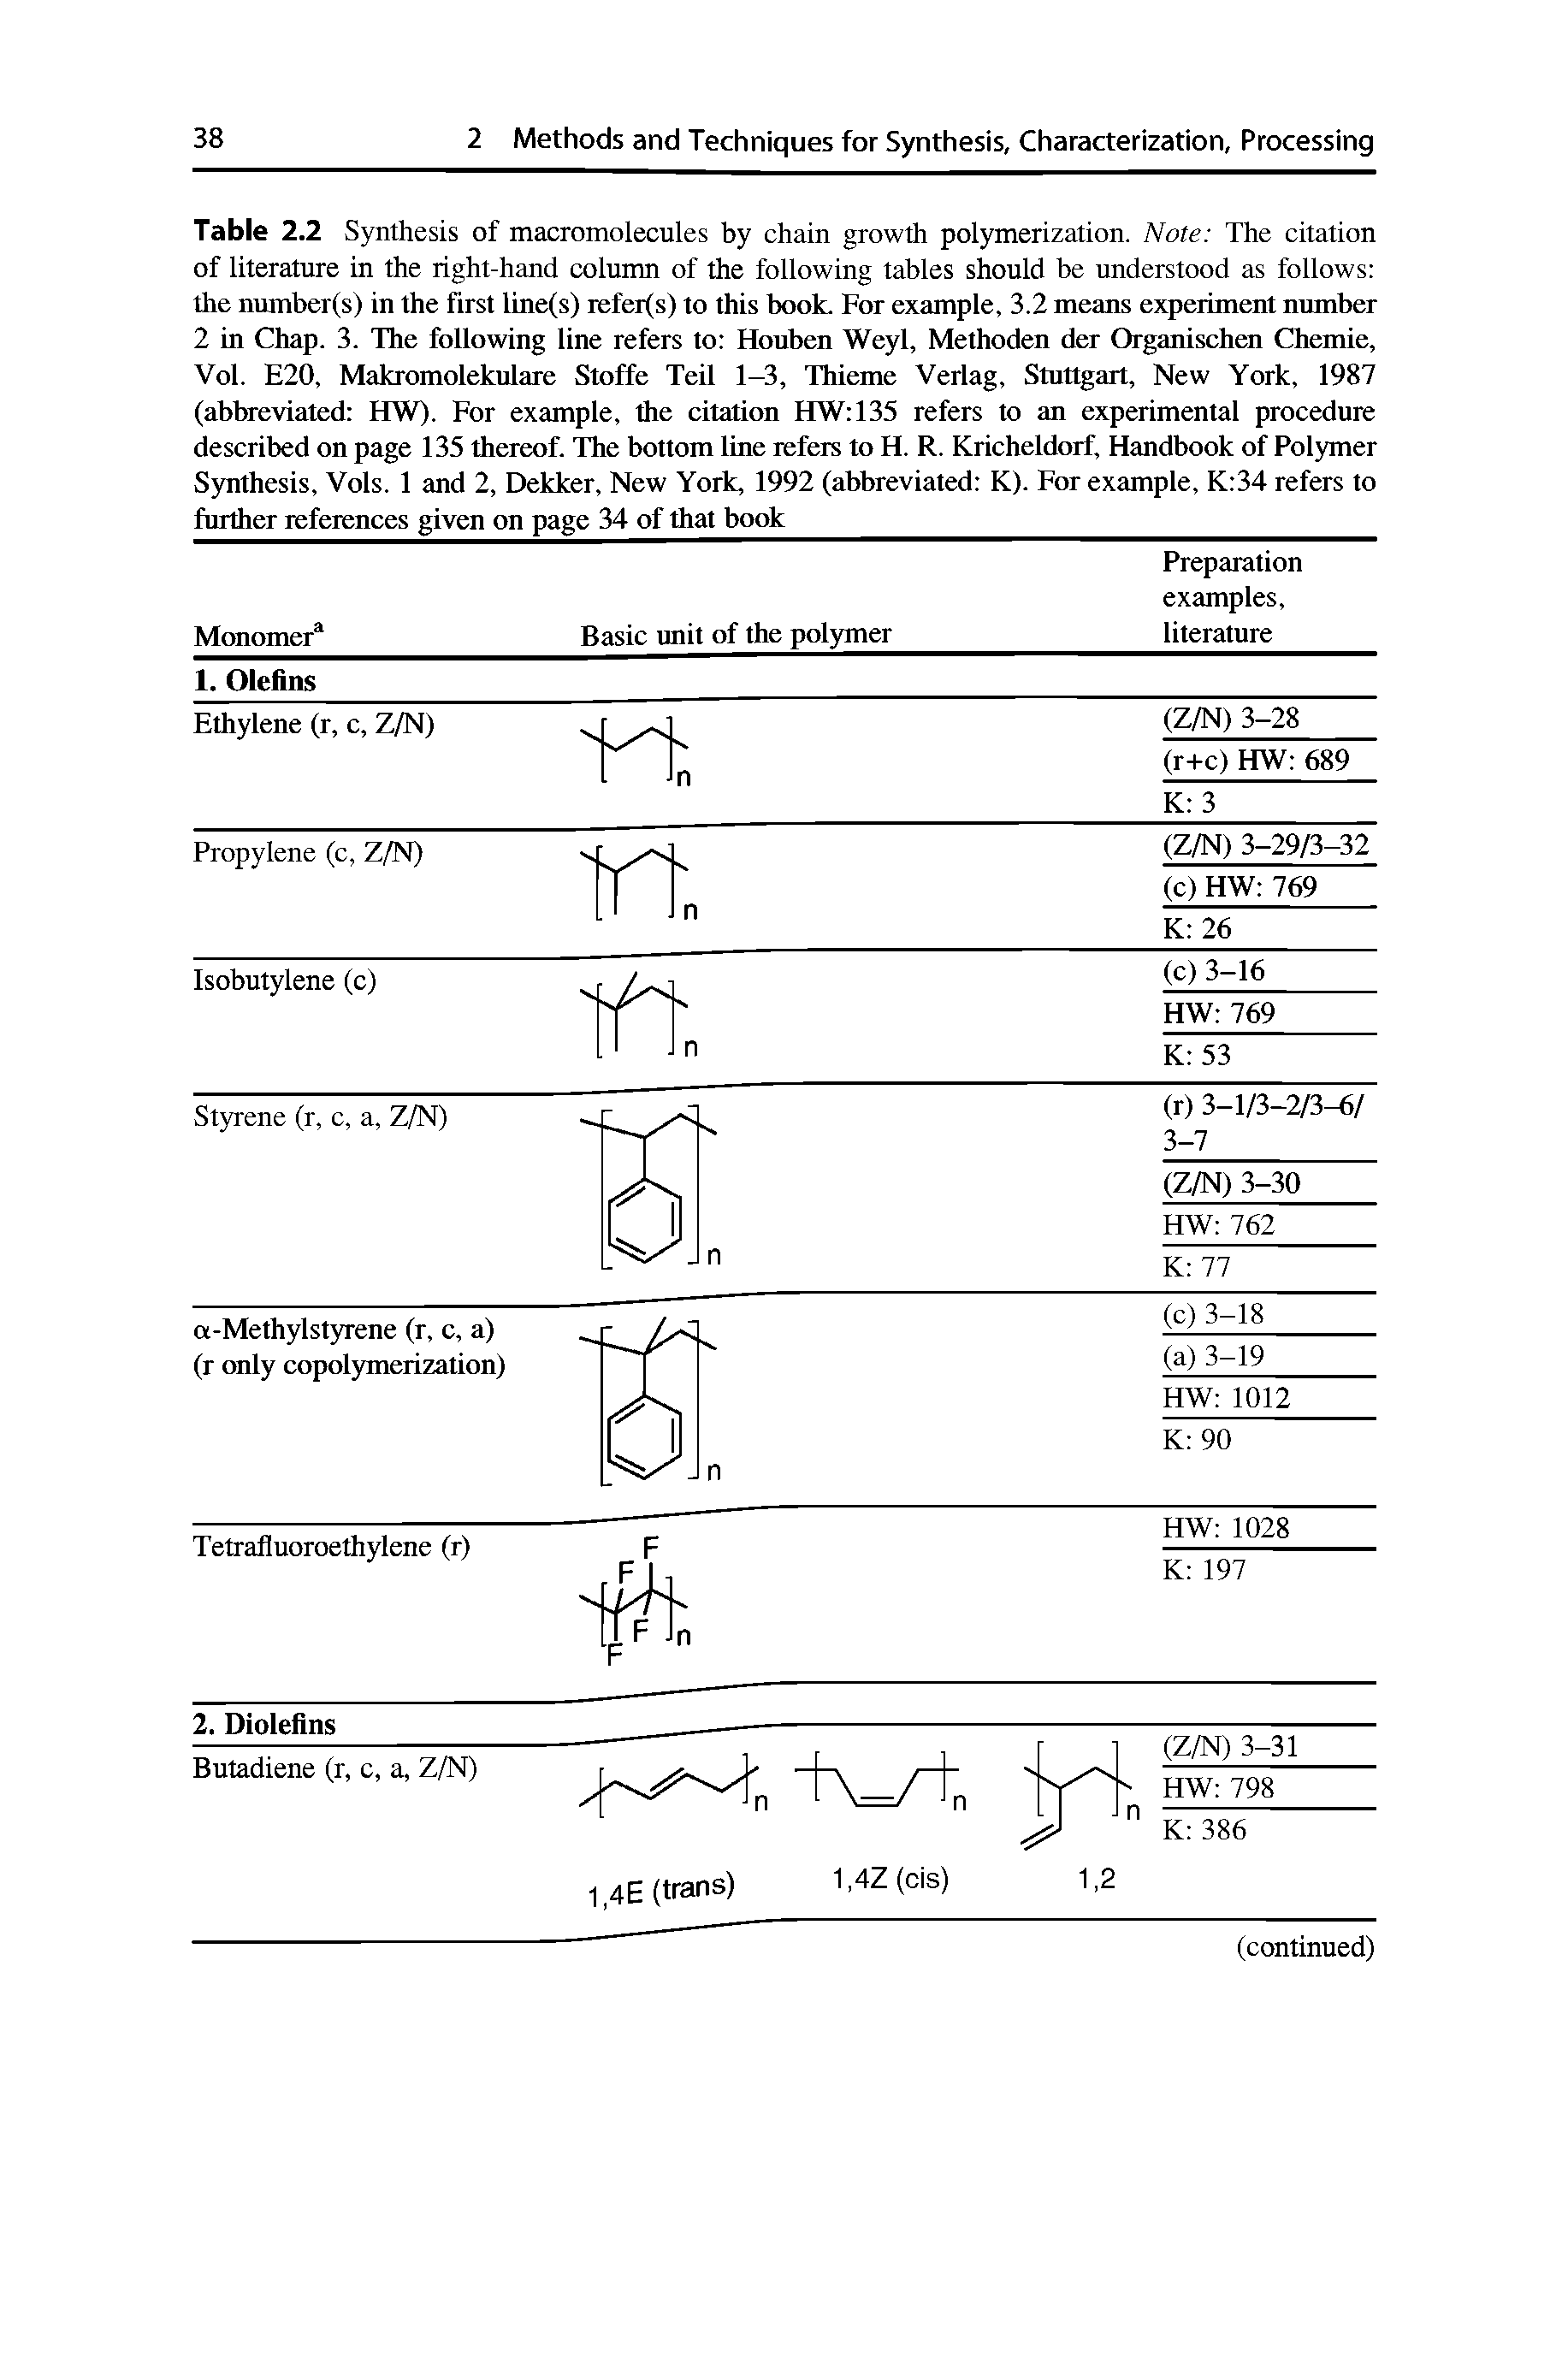 Table 2.2 Synthesis of macromolecules by chain growth polymerization. Note The citation of literature in the right-hand column of the following tables should be understood as follows the number(s) in the first line(s) refer(s) to this book. For example, 3.2 means experiment number 2 in Chap. 3. The following line refers to Houben Weyl, Methoden der Organischtai Chemie, Vol. E20, Makromolekulare Stoffe Teil 1-3, Thieme Verlag, Stuttgart, New York, 1987 (abbreviated HW). For example, the citation HW 135 refers to an experimental procedure described on page 135 thereof. The bottom line refers to H. R. Kricheldorf, Handbook of Polymer Synthesis, Vols. 1 and 2, Dekker, New York, 1992 (abbreviated K). For example, K 34 refers to further references given on page 34 of that book...